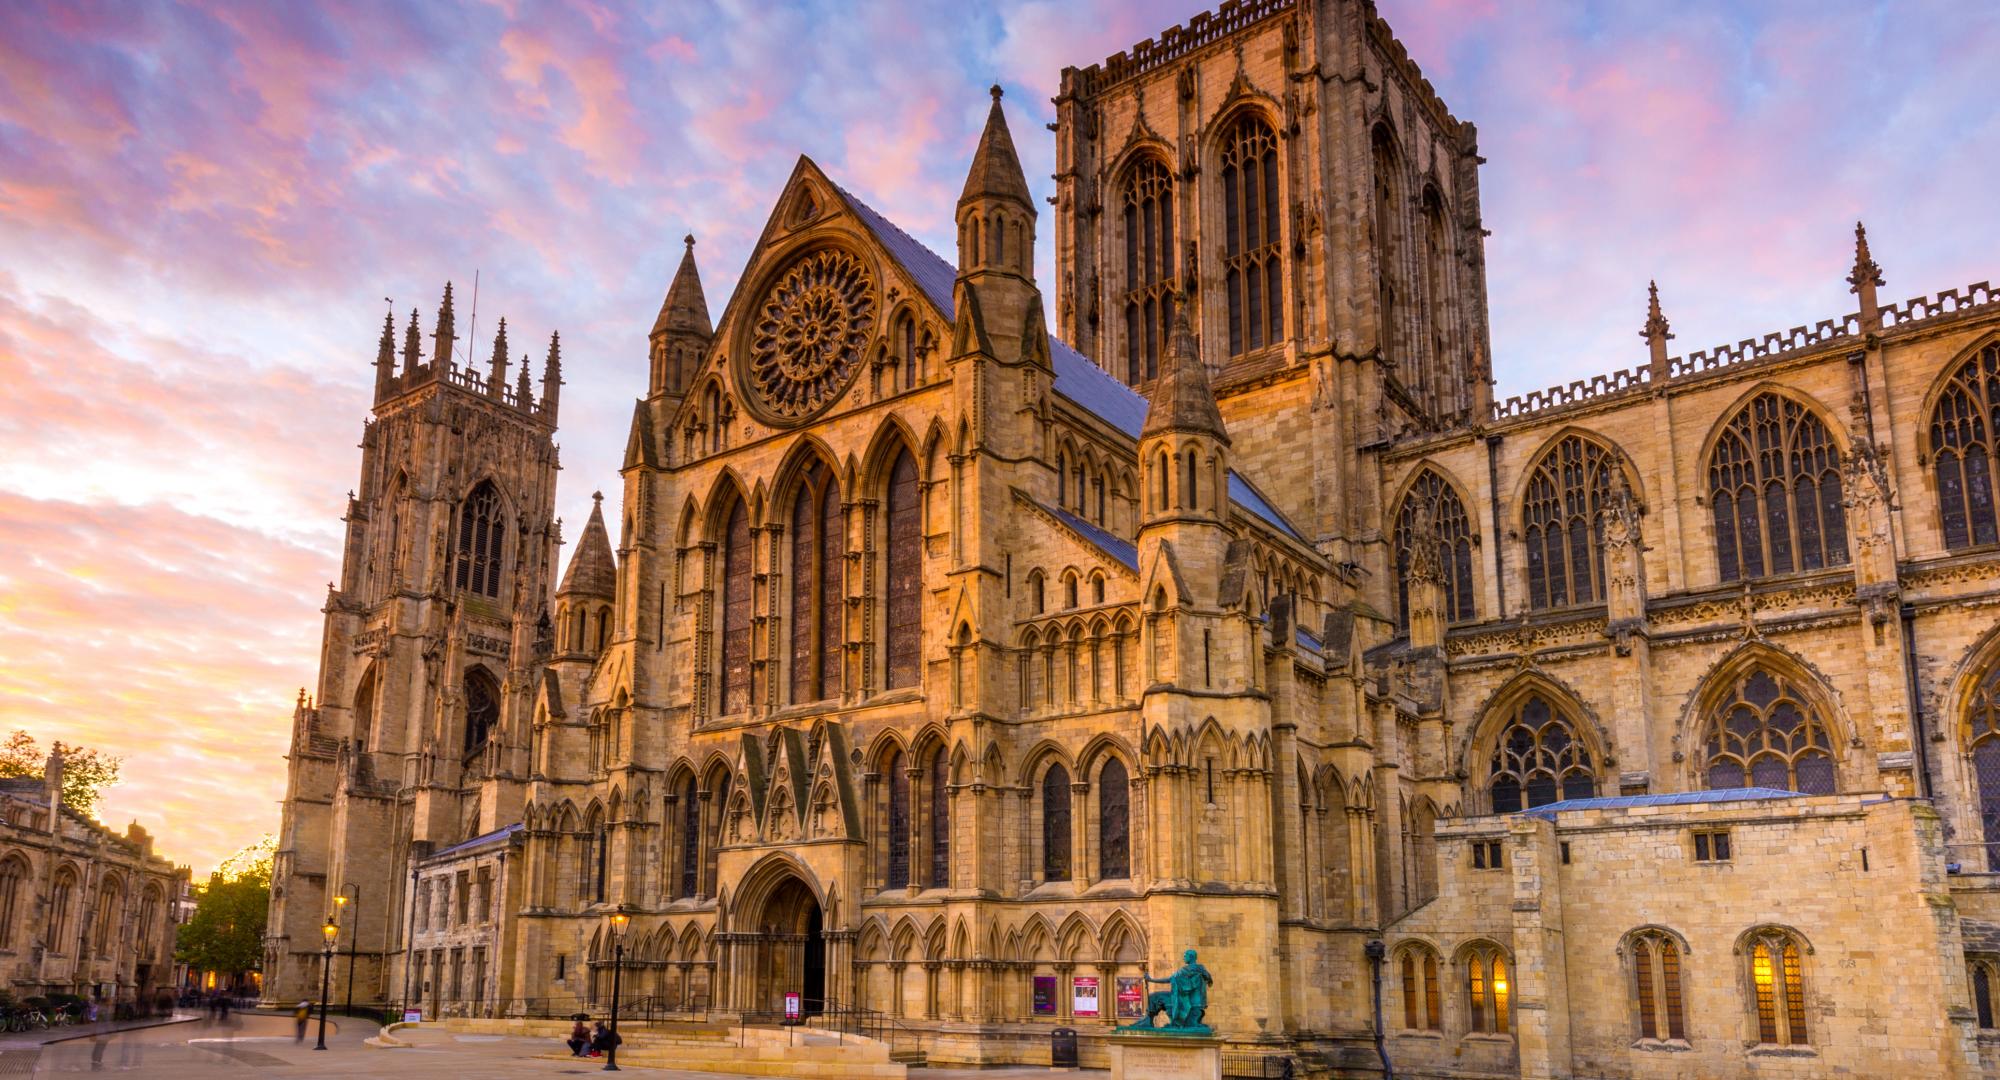 Wide angle view of York Minster at sunset in the city of York, Yorkshire